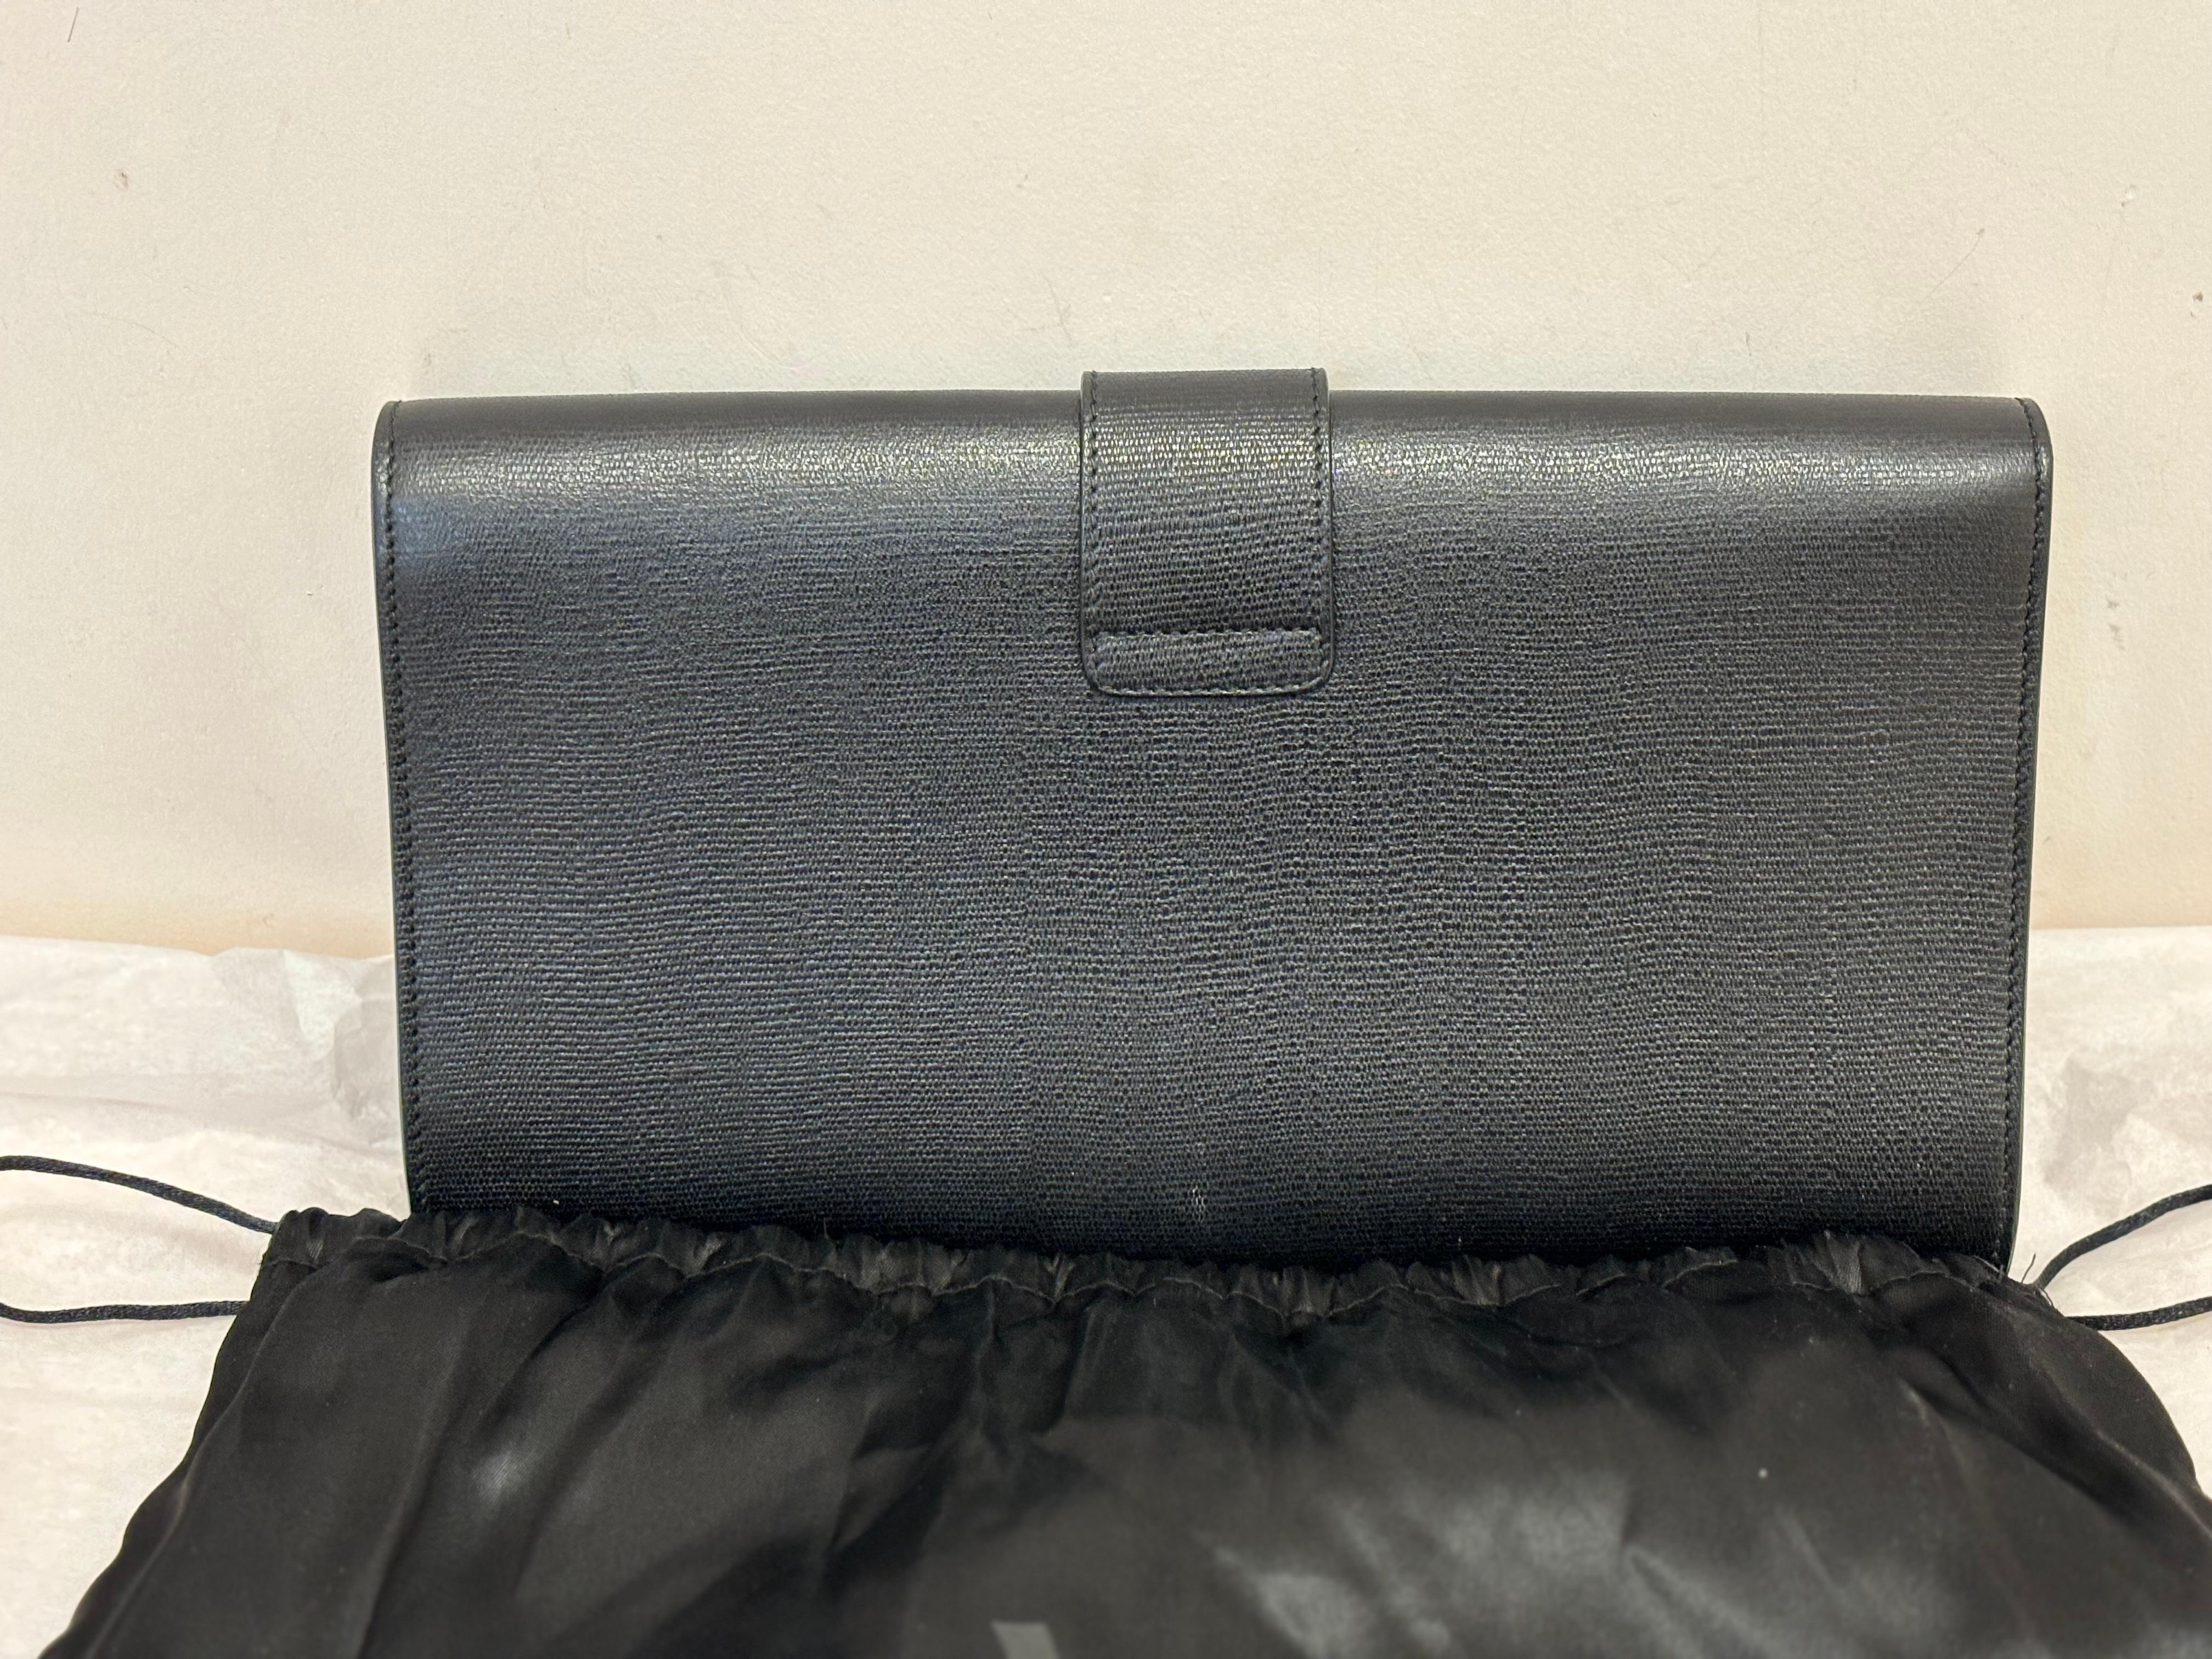 YSL Y Ligne Black Textured Leather Clutch w/Dust Bag In Good Condition For Sale In Port Hope, ON